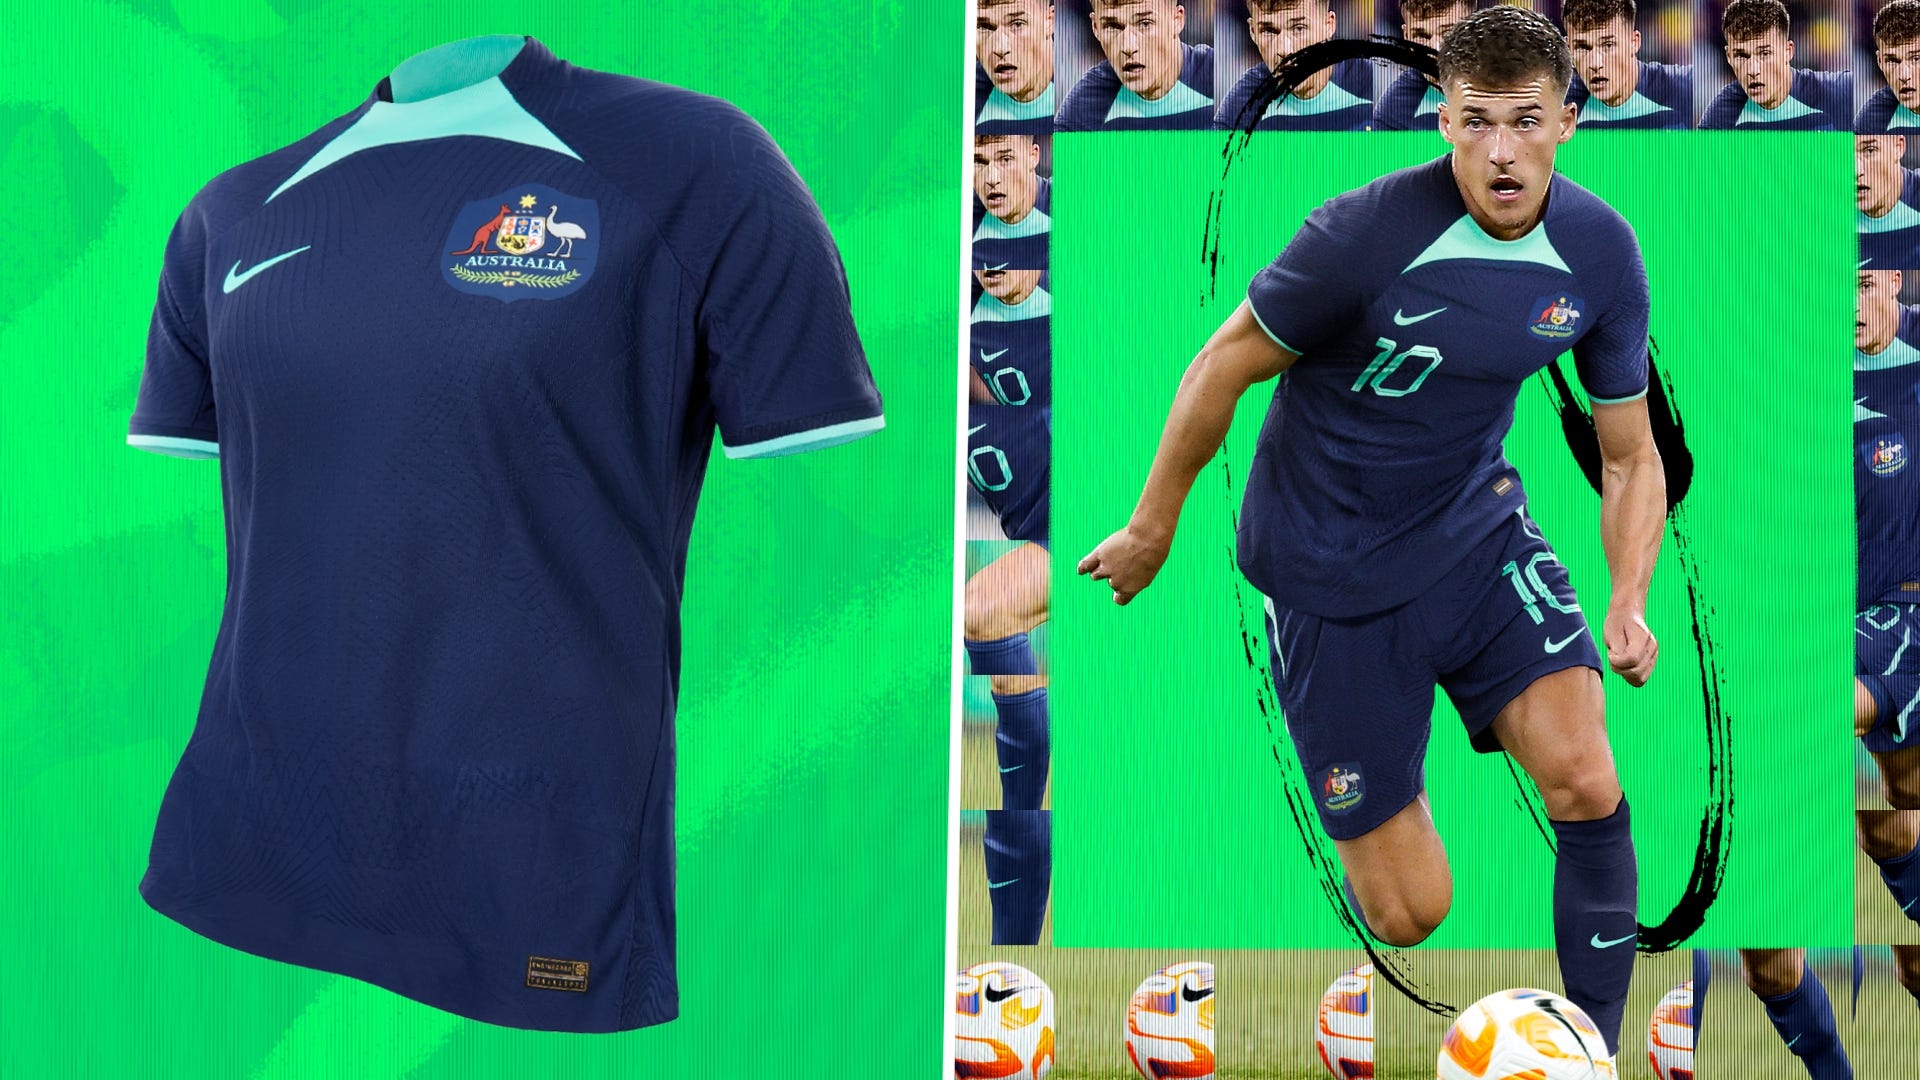 England Unveil 1992 Edition Inspired World Cup Kit, Fans Not Too Impressed